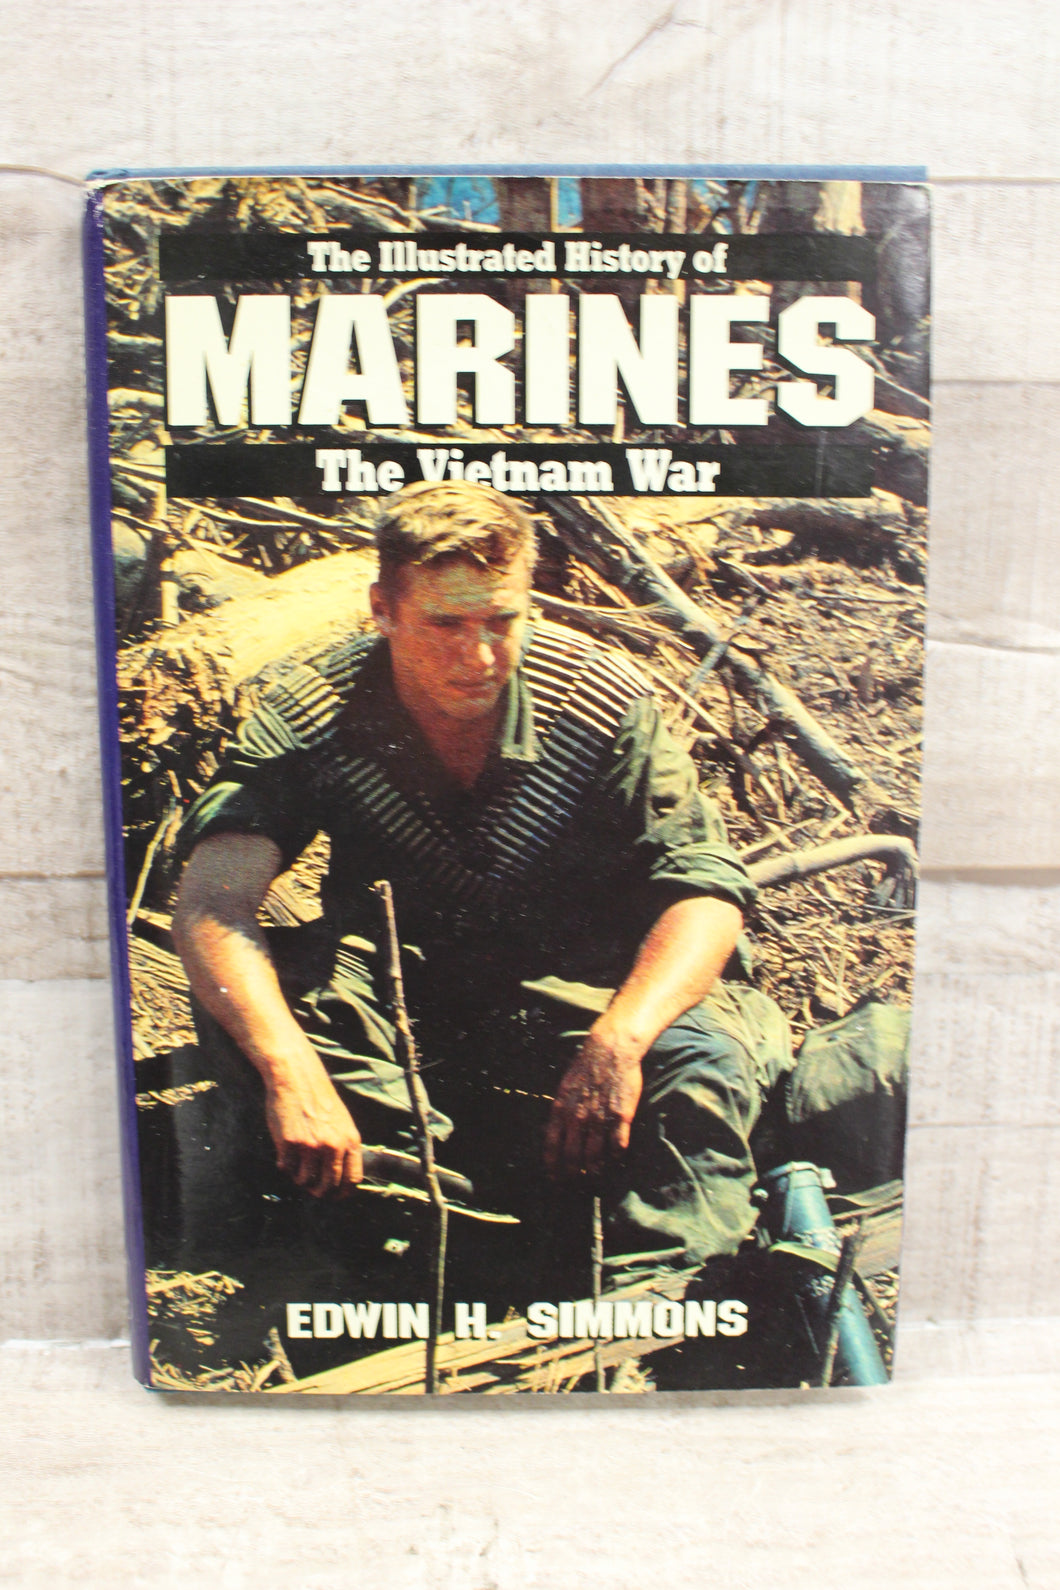 Illustrated History of the Vietnam War: Marines Simmons, Edwin -Used